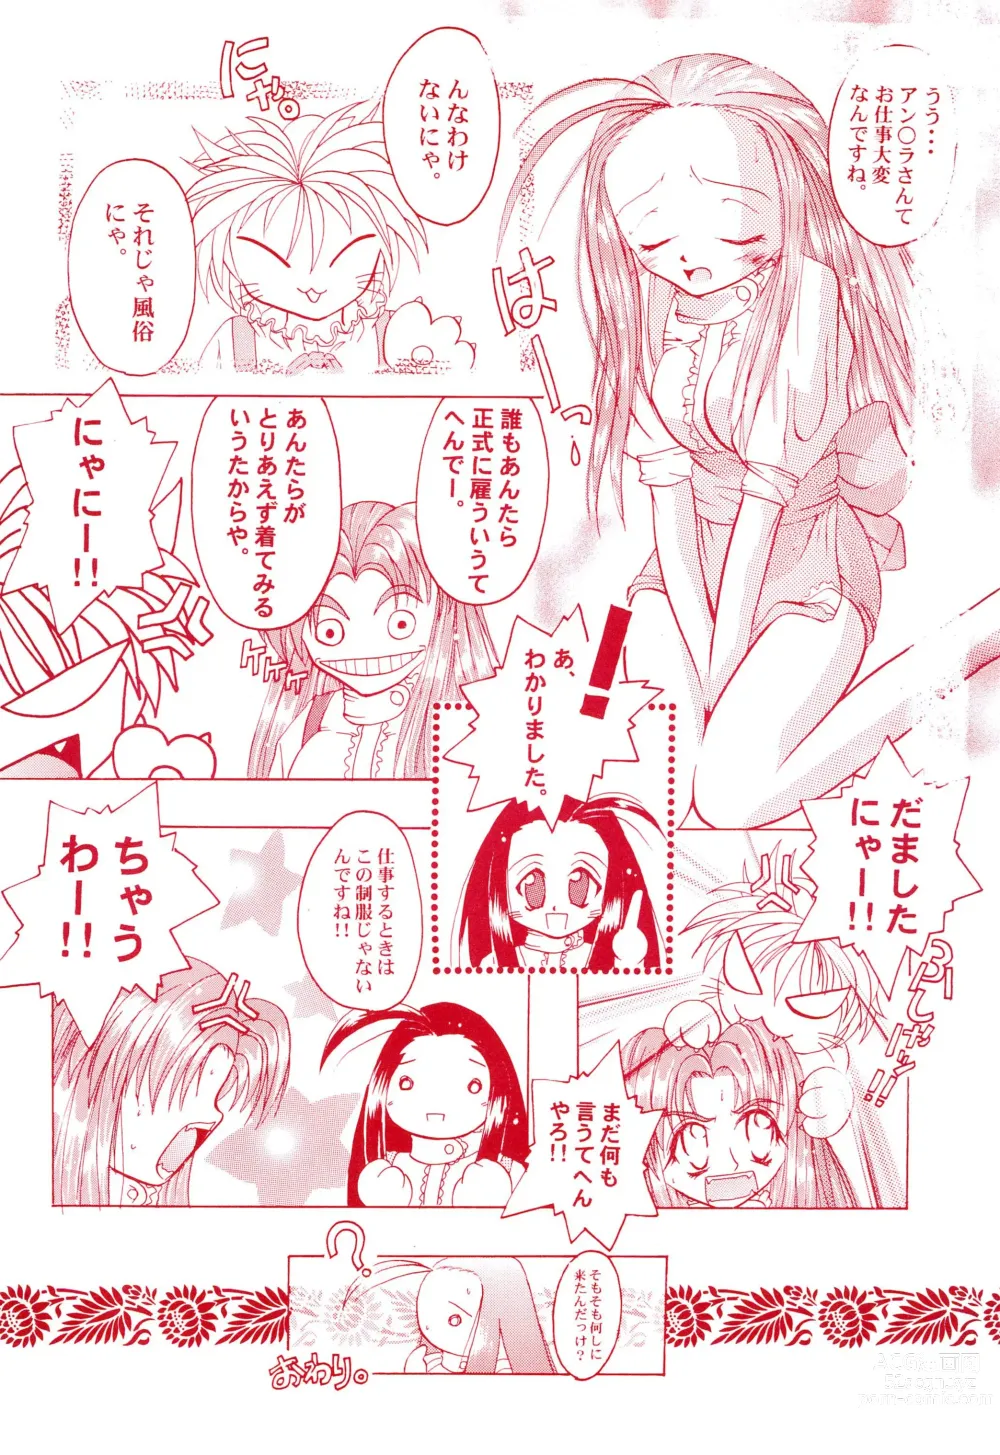 Page 28 of doujinshi Get Sweet ”A” Low Phone Anna Mirrors ORIGINAL STORY